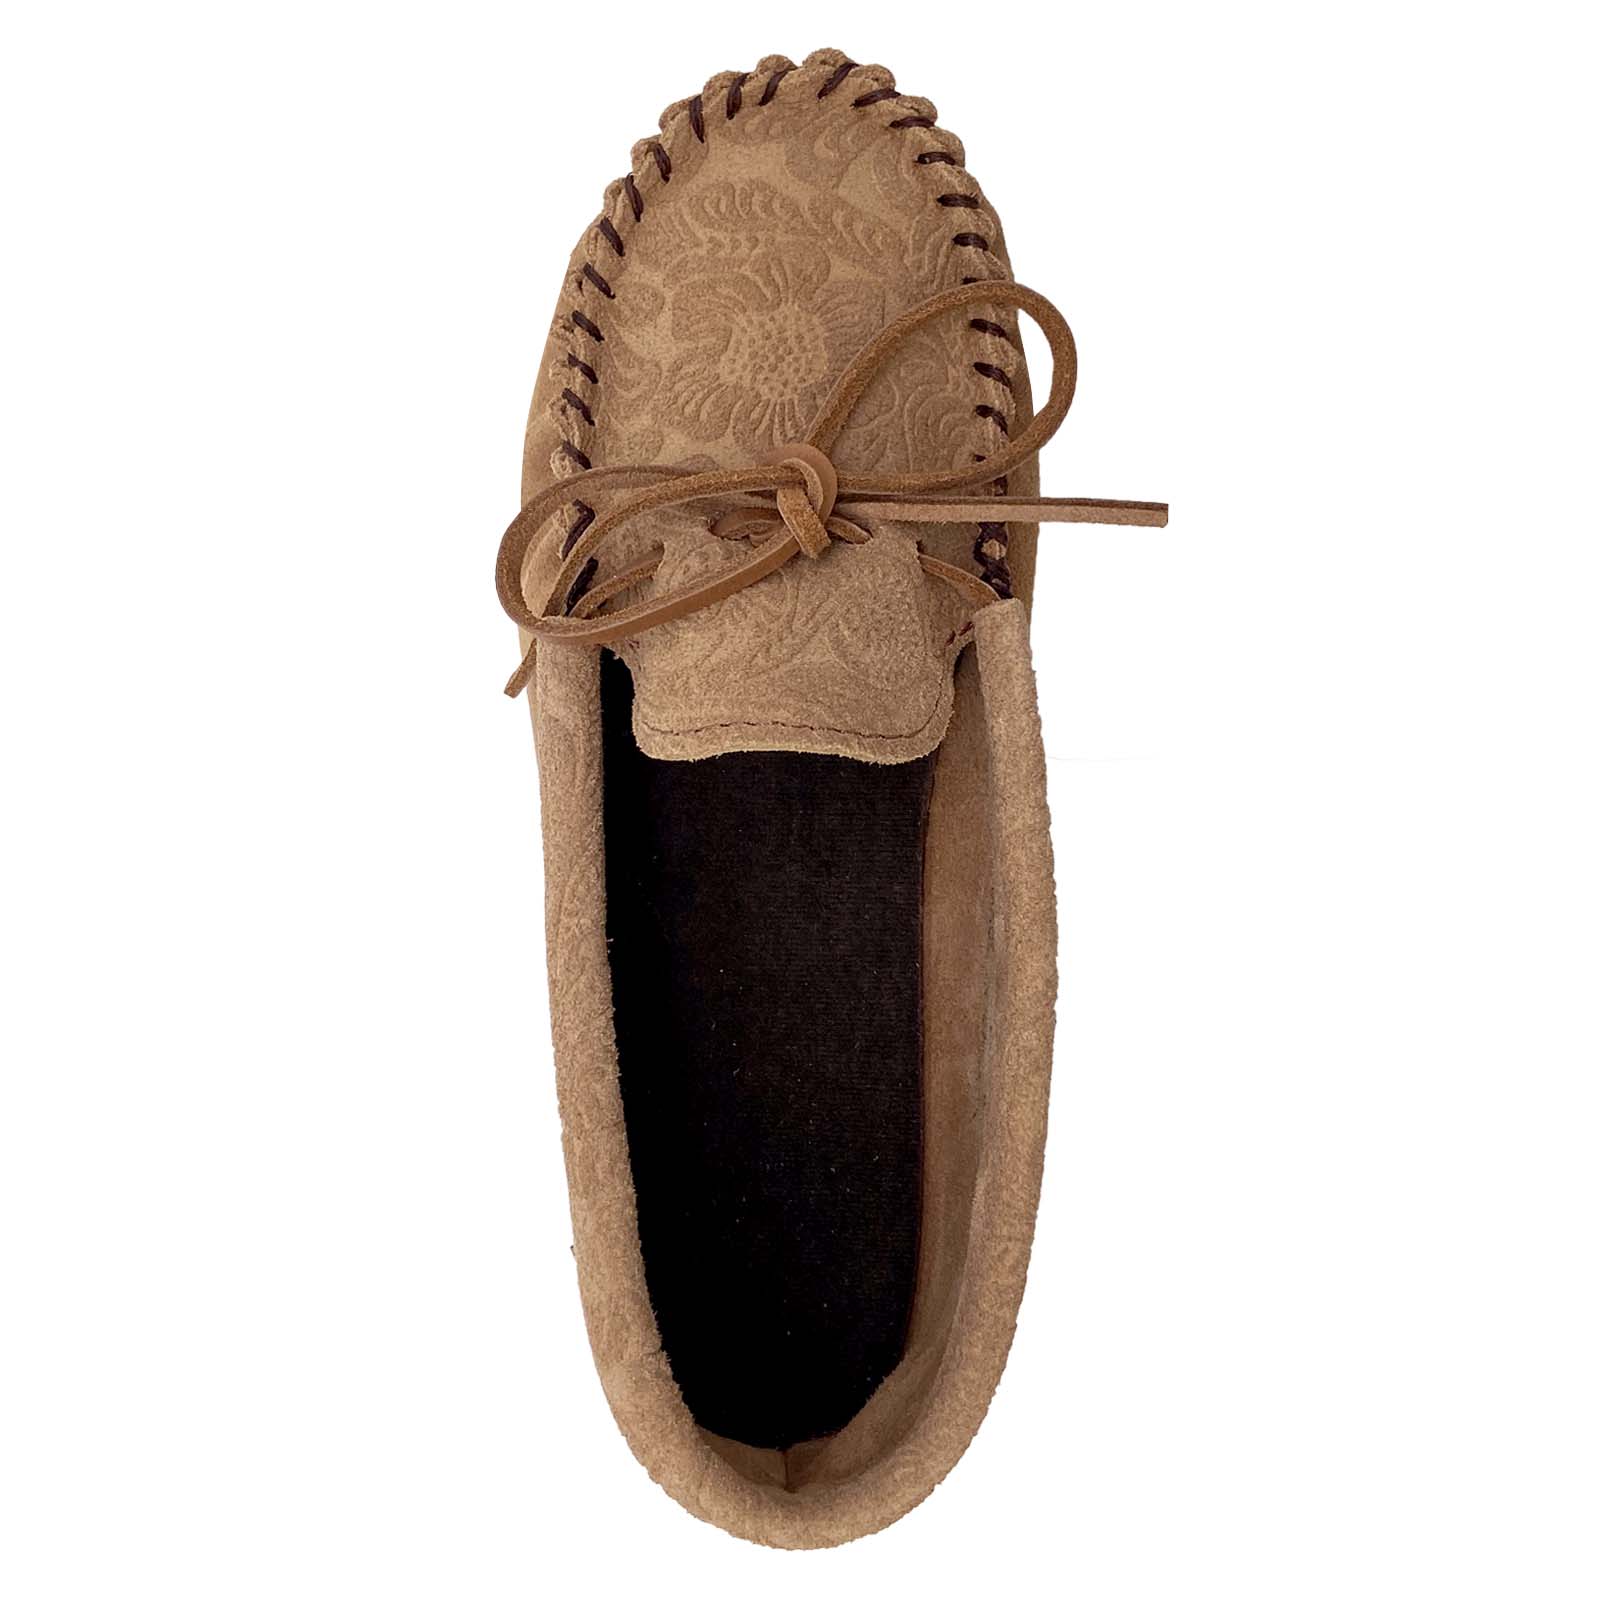 Women's Floral Embossed Moccasin Shoes